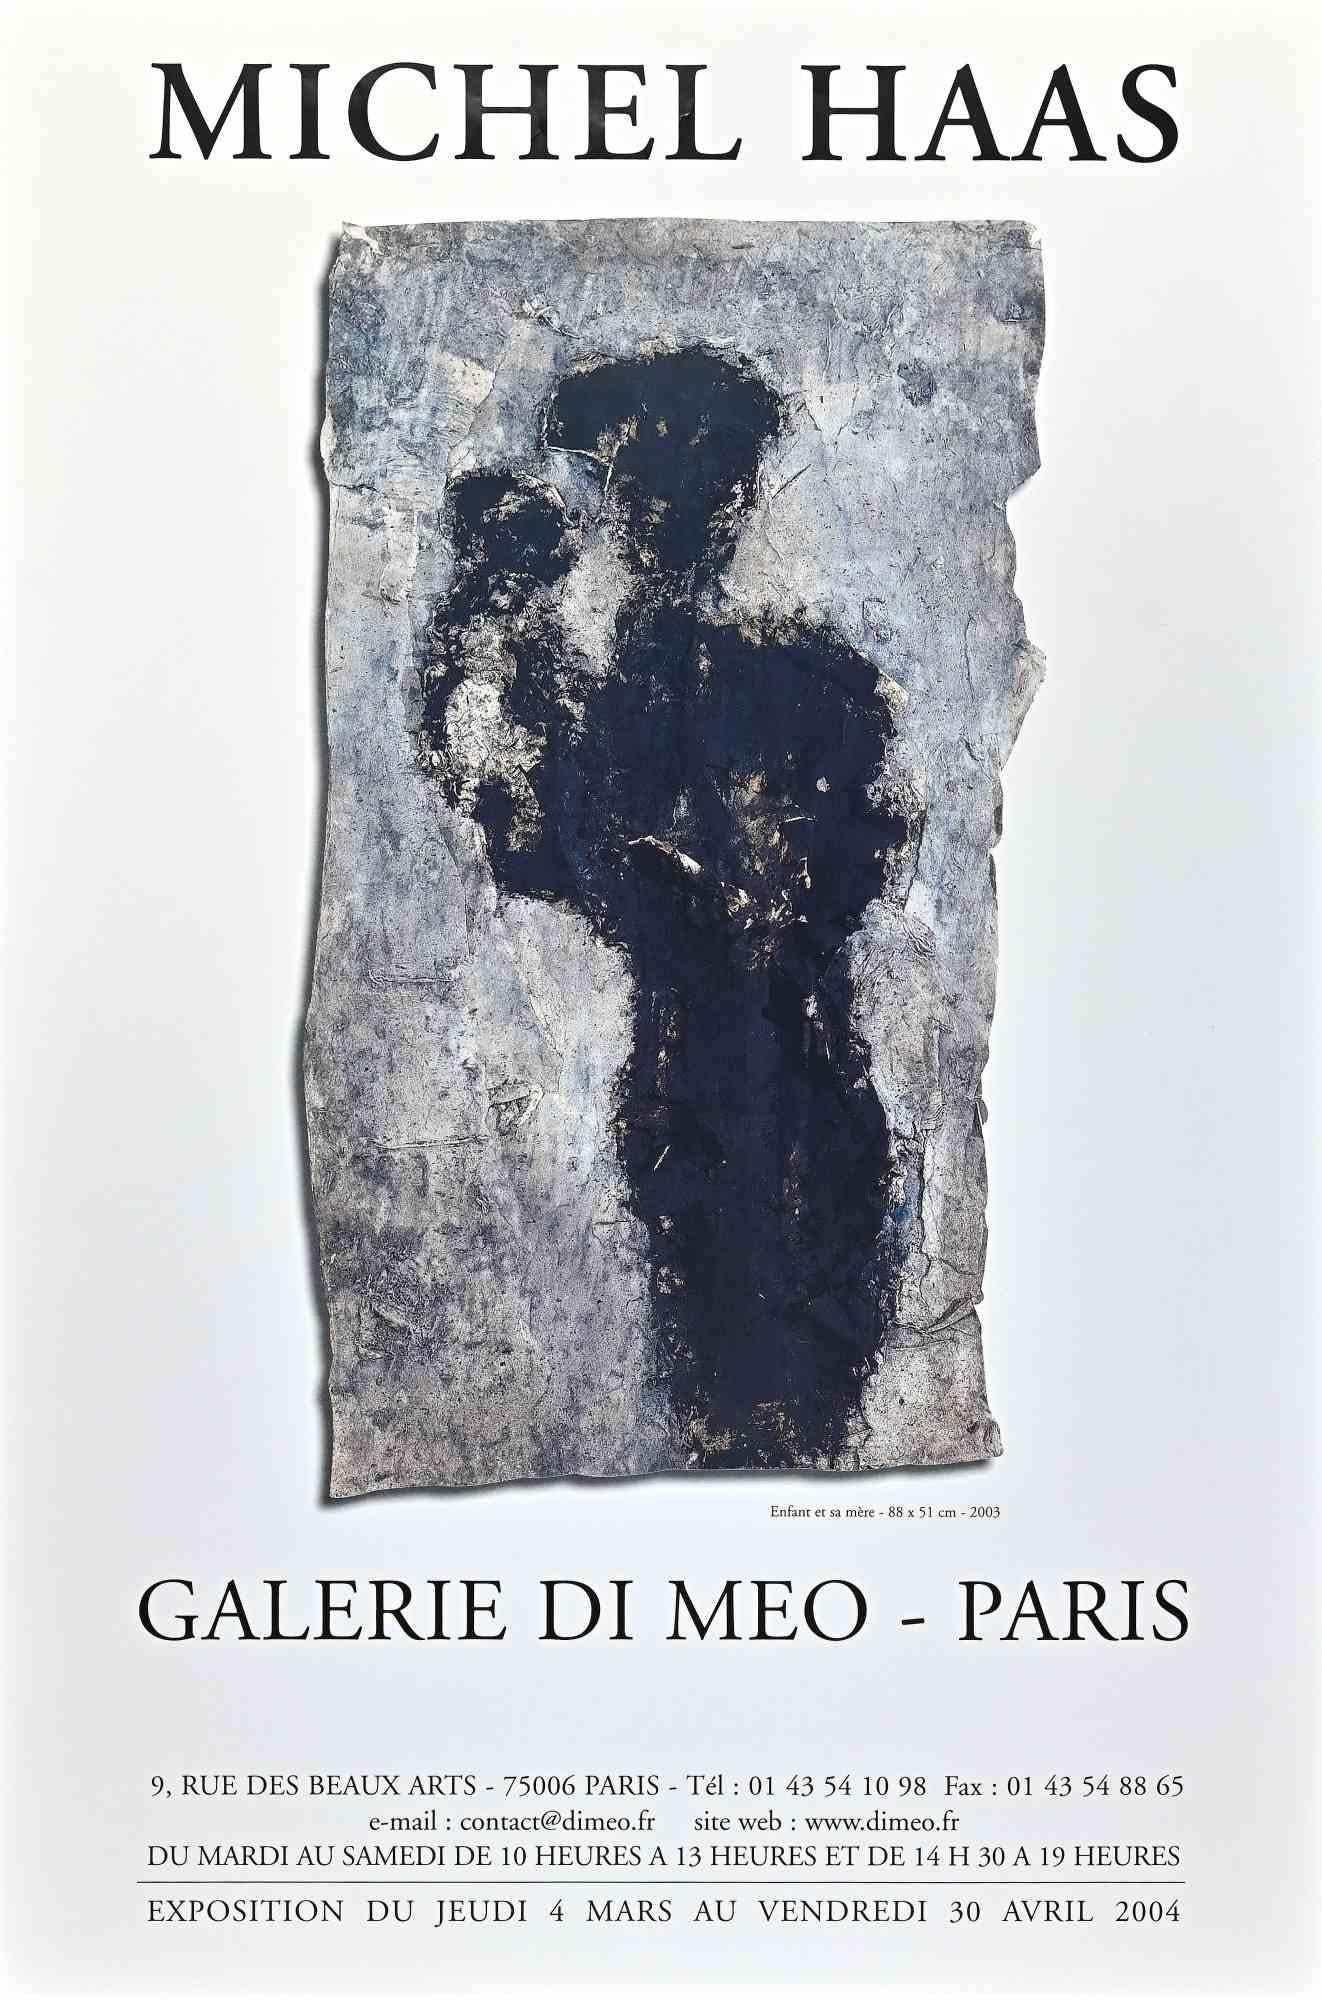 Vintage Poster is an Offset realized for the exhibition by Michel Haas at Galerie Di Meo Paris in 2003.

The artwork is represented in a well-balanced composition.

Good condition, no signature.

Michel Haas  born on May 15 , 1934 in Paris and died